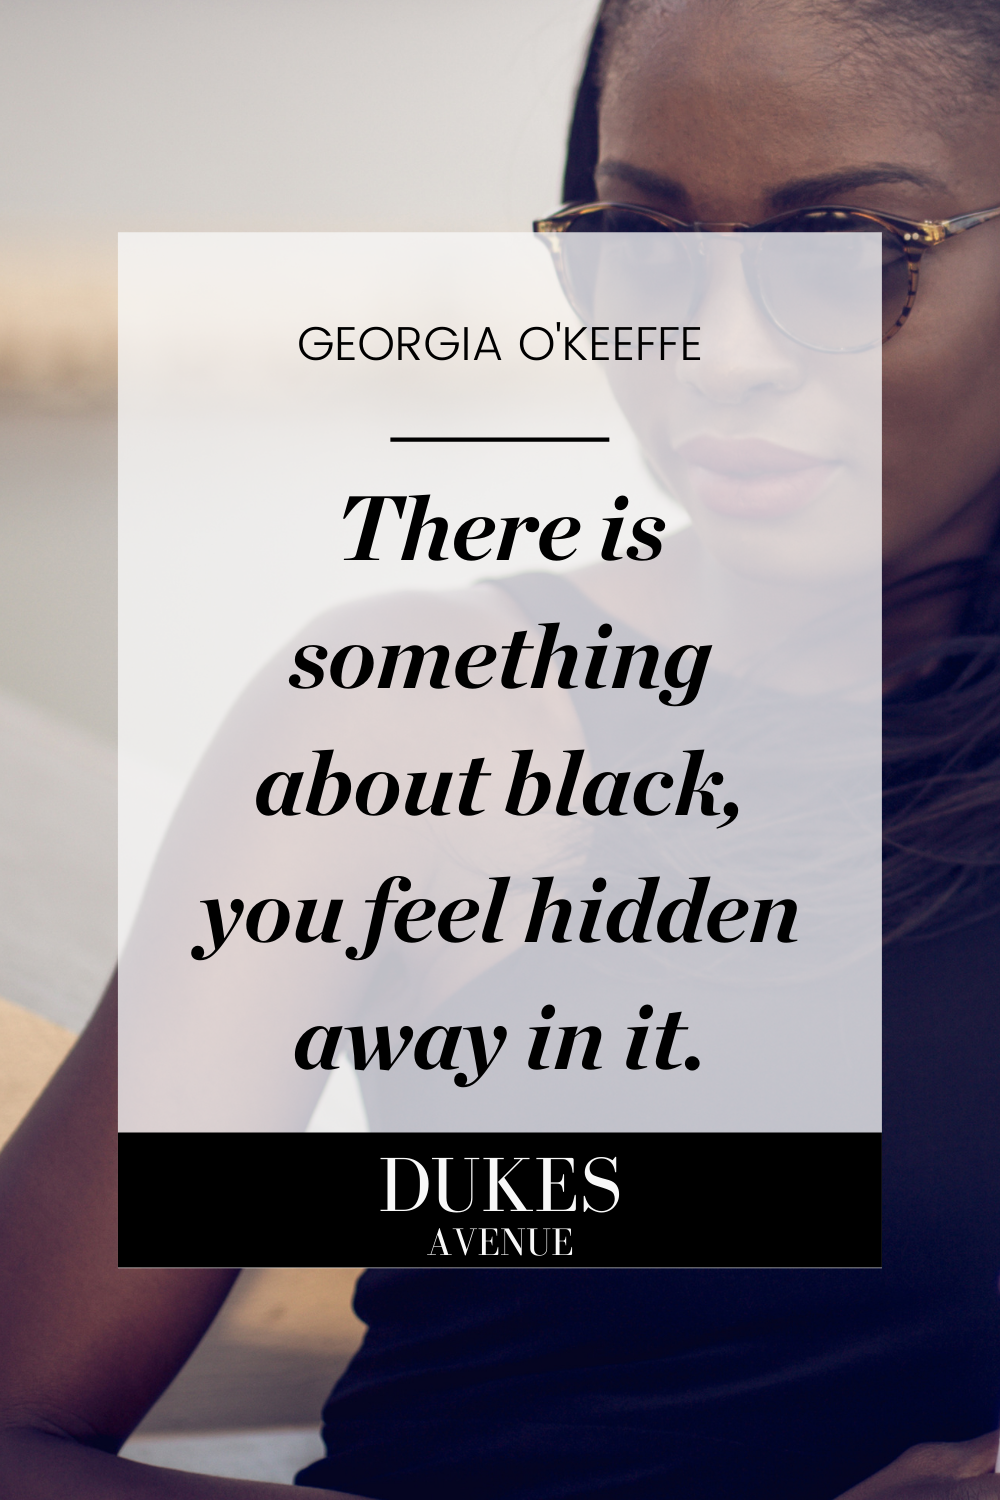 Woman wearing black with Georgia O'Keeffe black dress quote as a text overlay. 